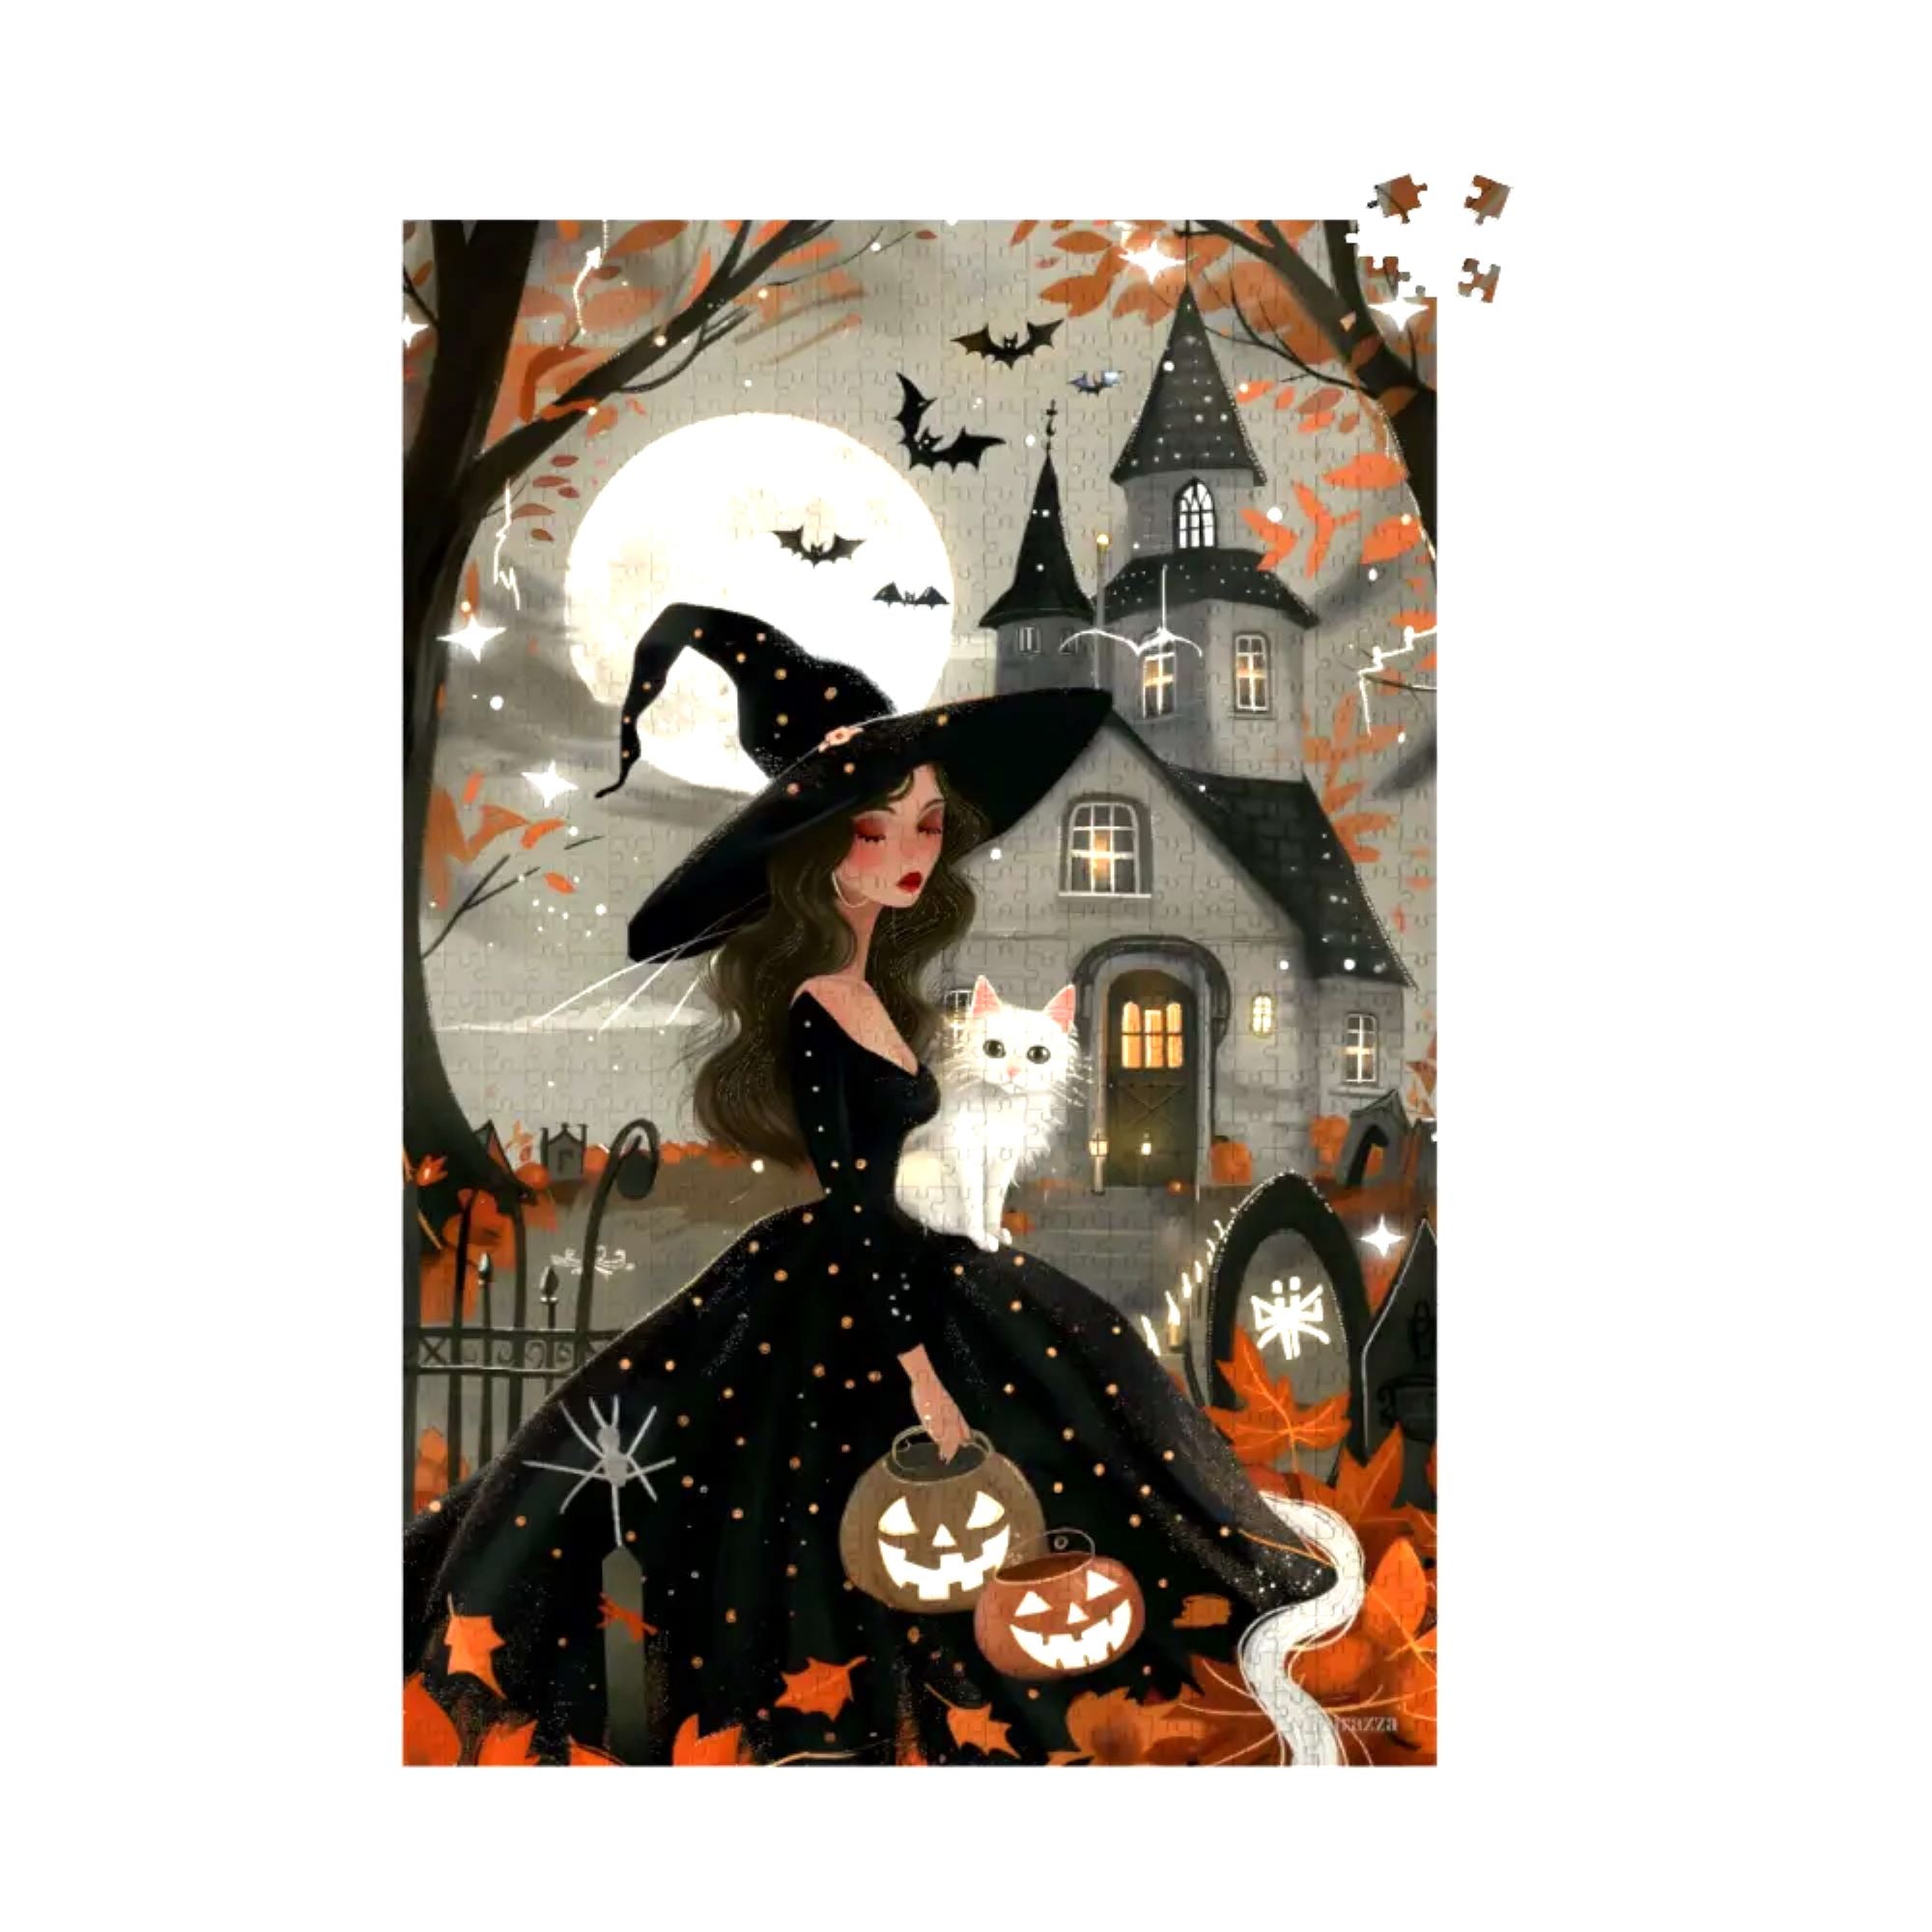 Moonlight Witch Jigsaw Puzzle 500 or 1000 Piece